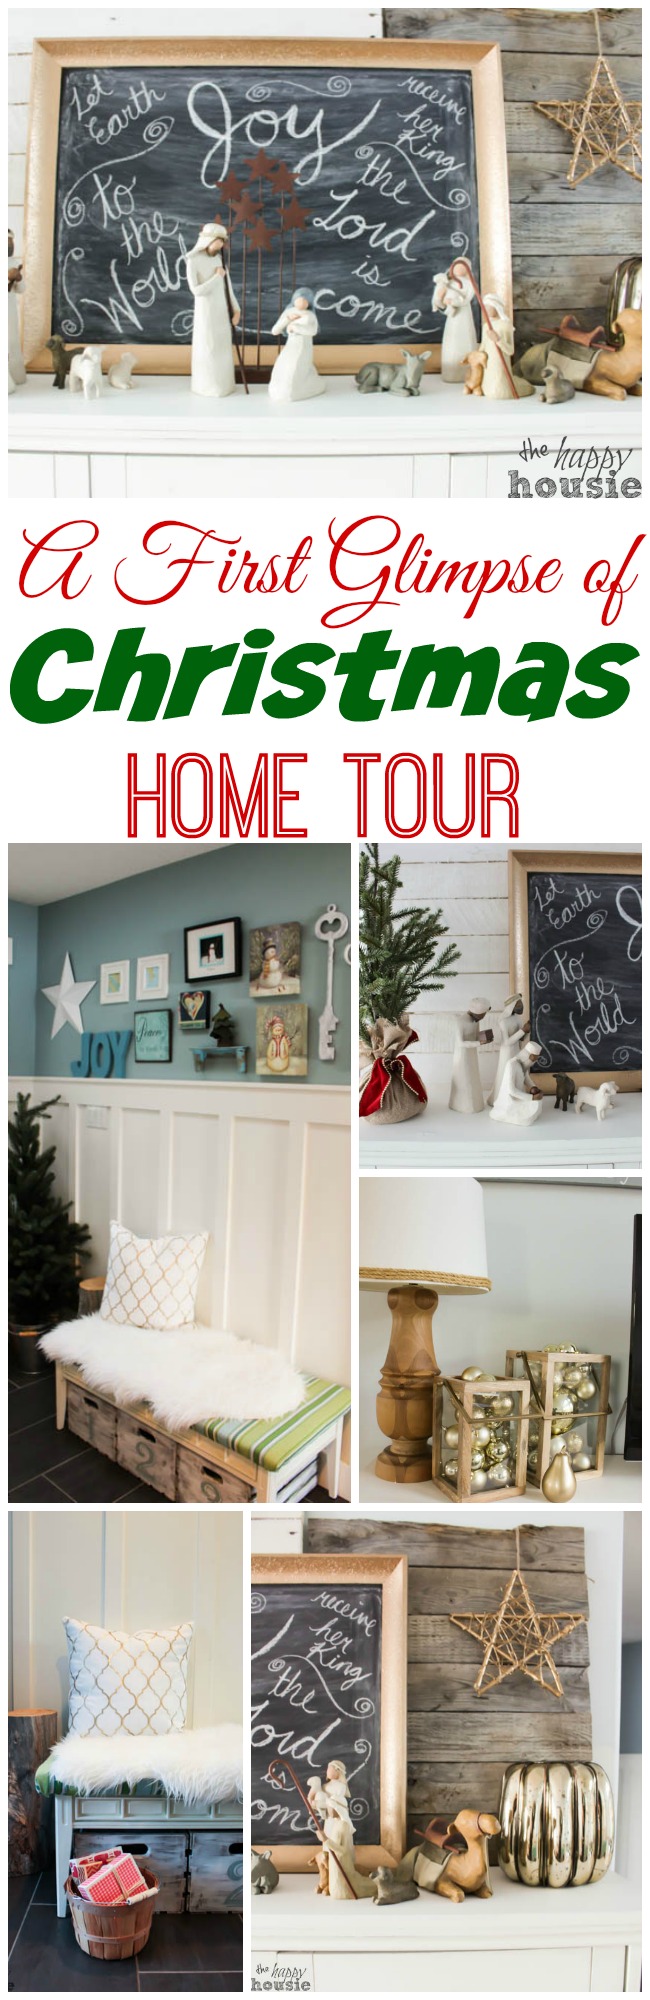 A First Glimpse of Christmas Home Tour at The Happy Housie